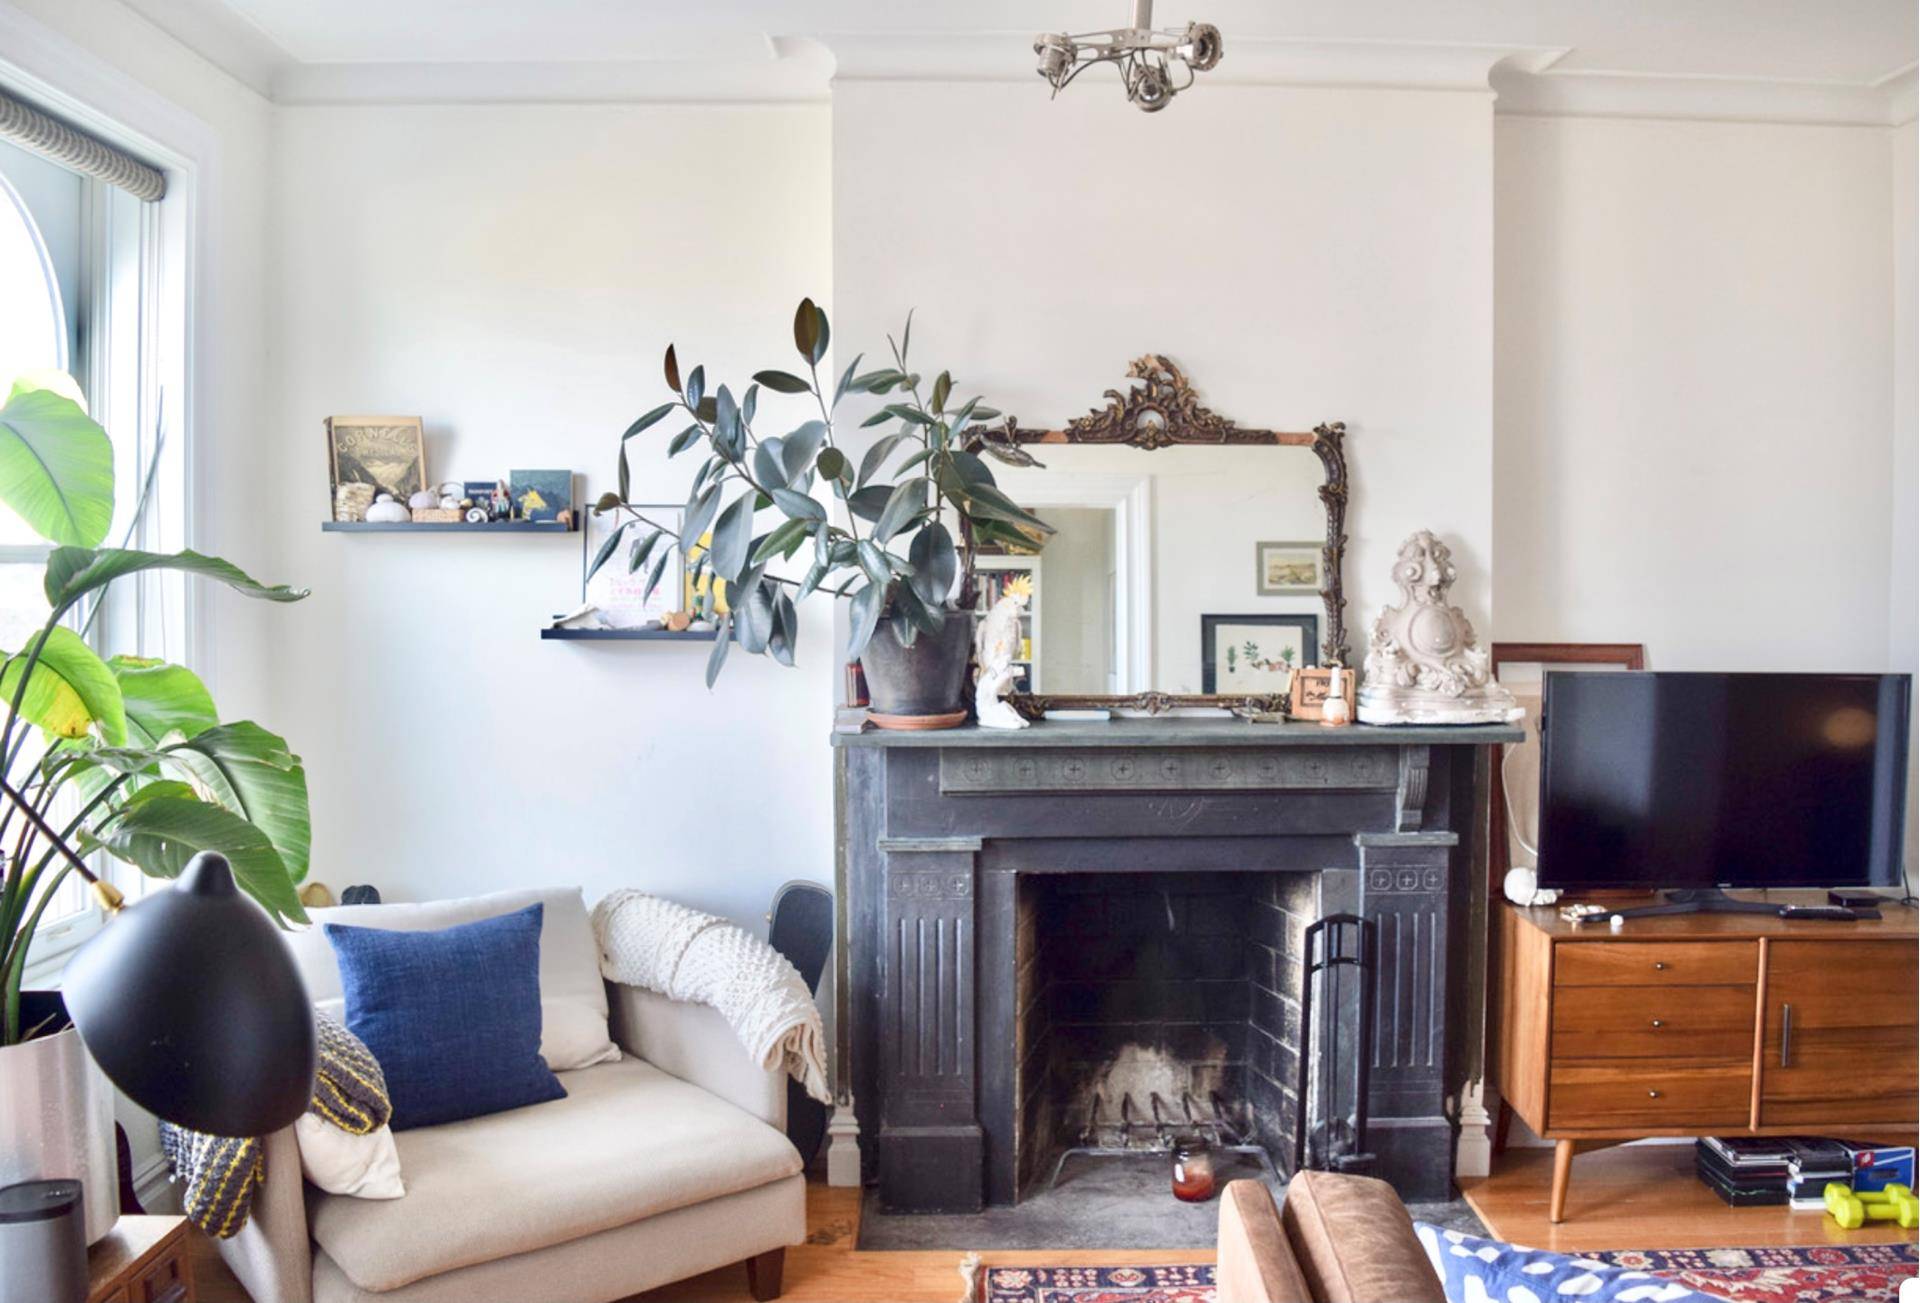 The sky is everywhere in this sprawling, elegant, top floor, Cobble Hill apartment.